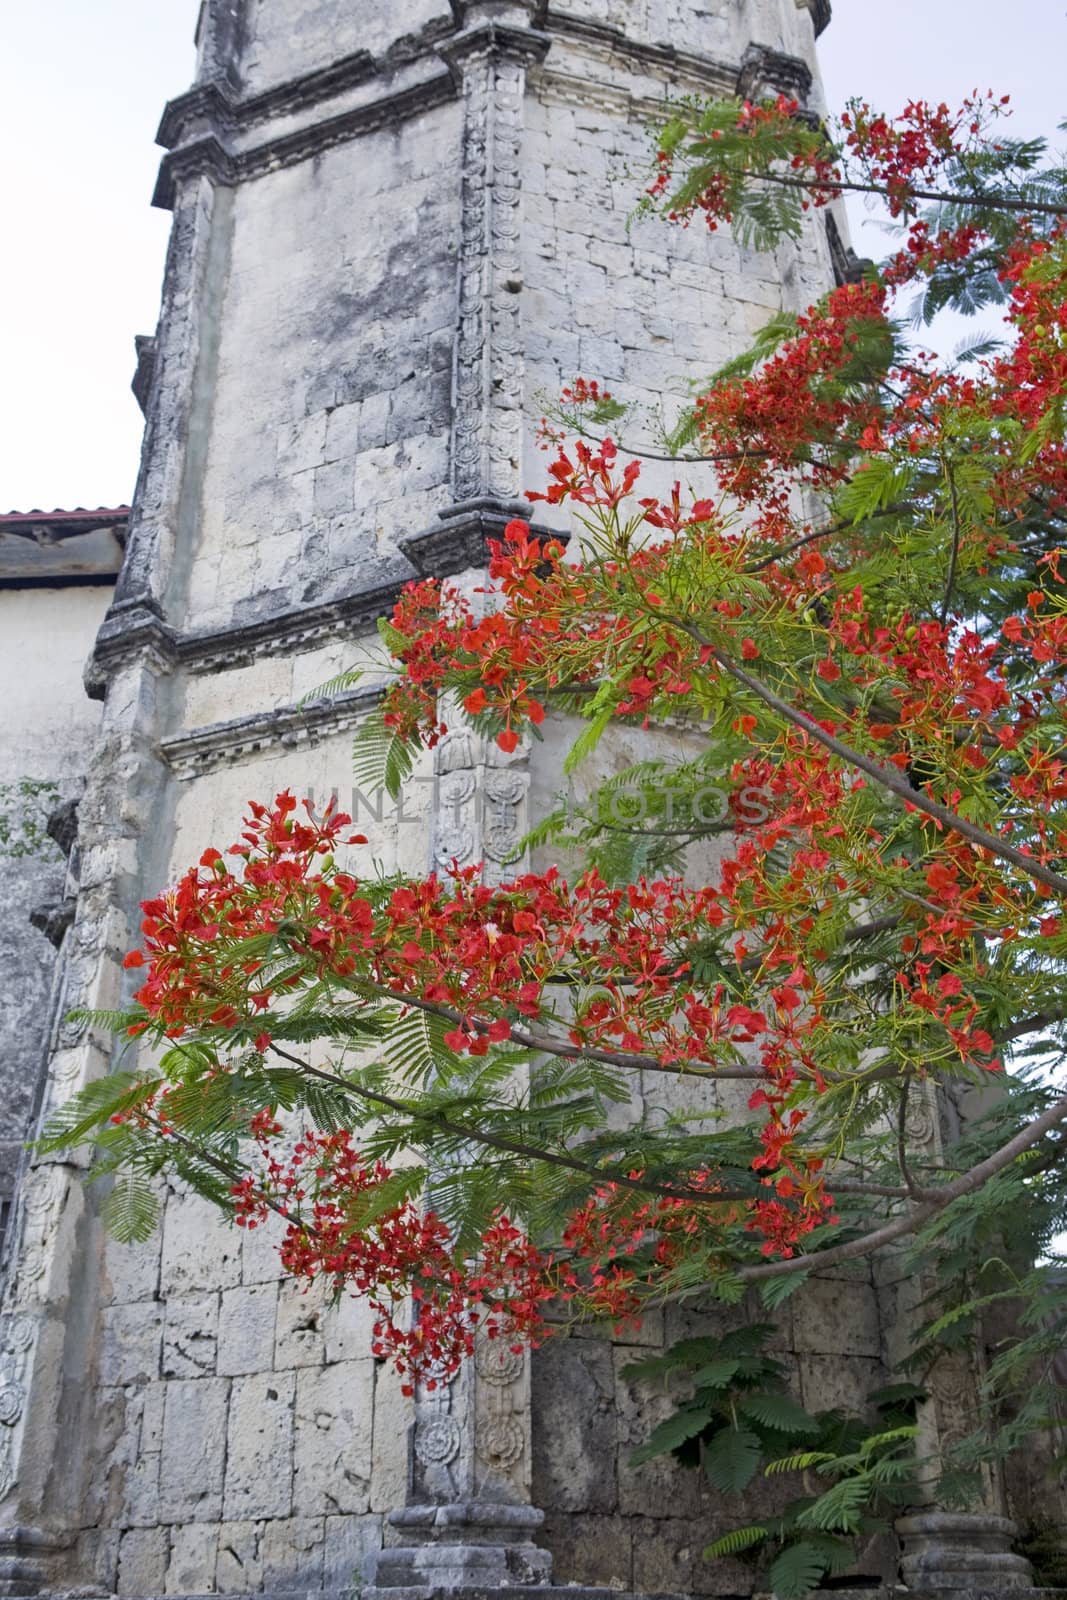 Vibrant red blossoms of the Flamboyant Flame Tree, Delonix regia, frame one of the limestone belltowers of the Baroque architectural design of the San Nicolas Tolentio parish church in Dimiao, Bohol Island, Bohol, Philippine Islands.